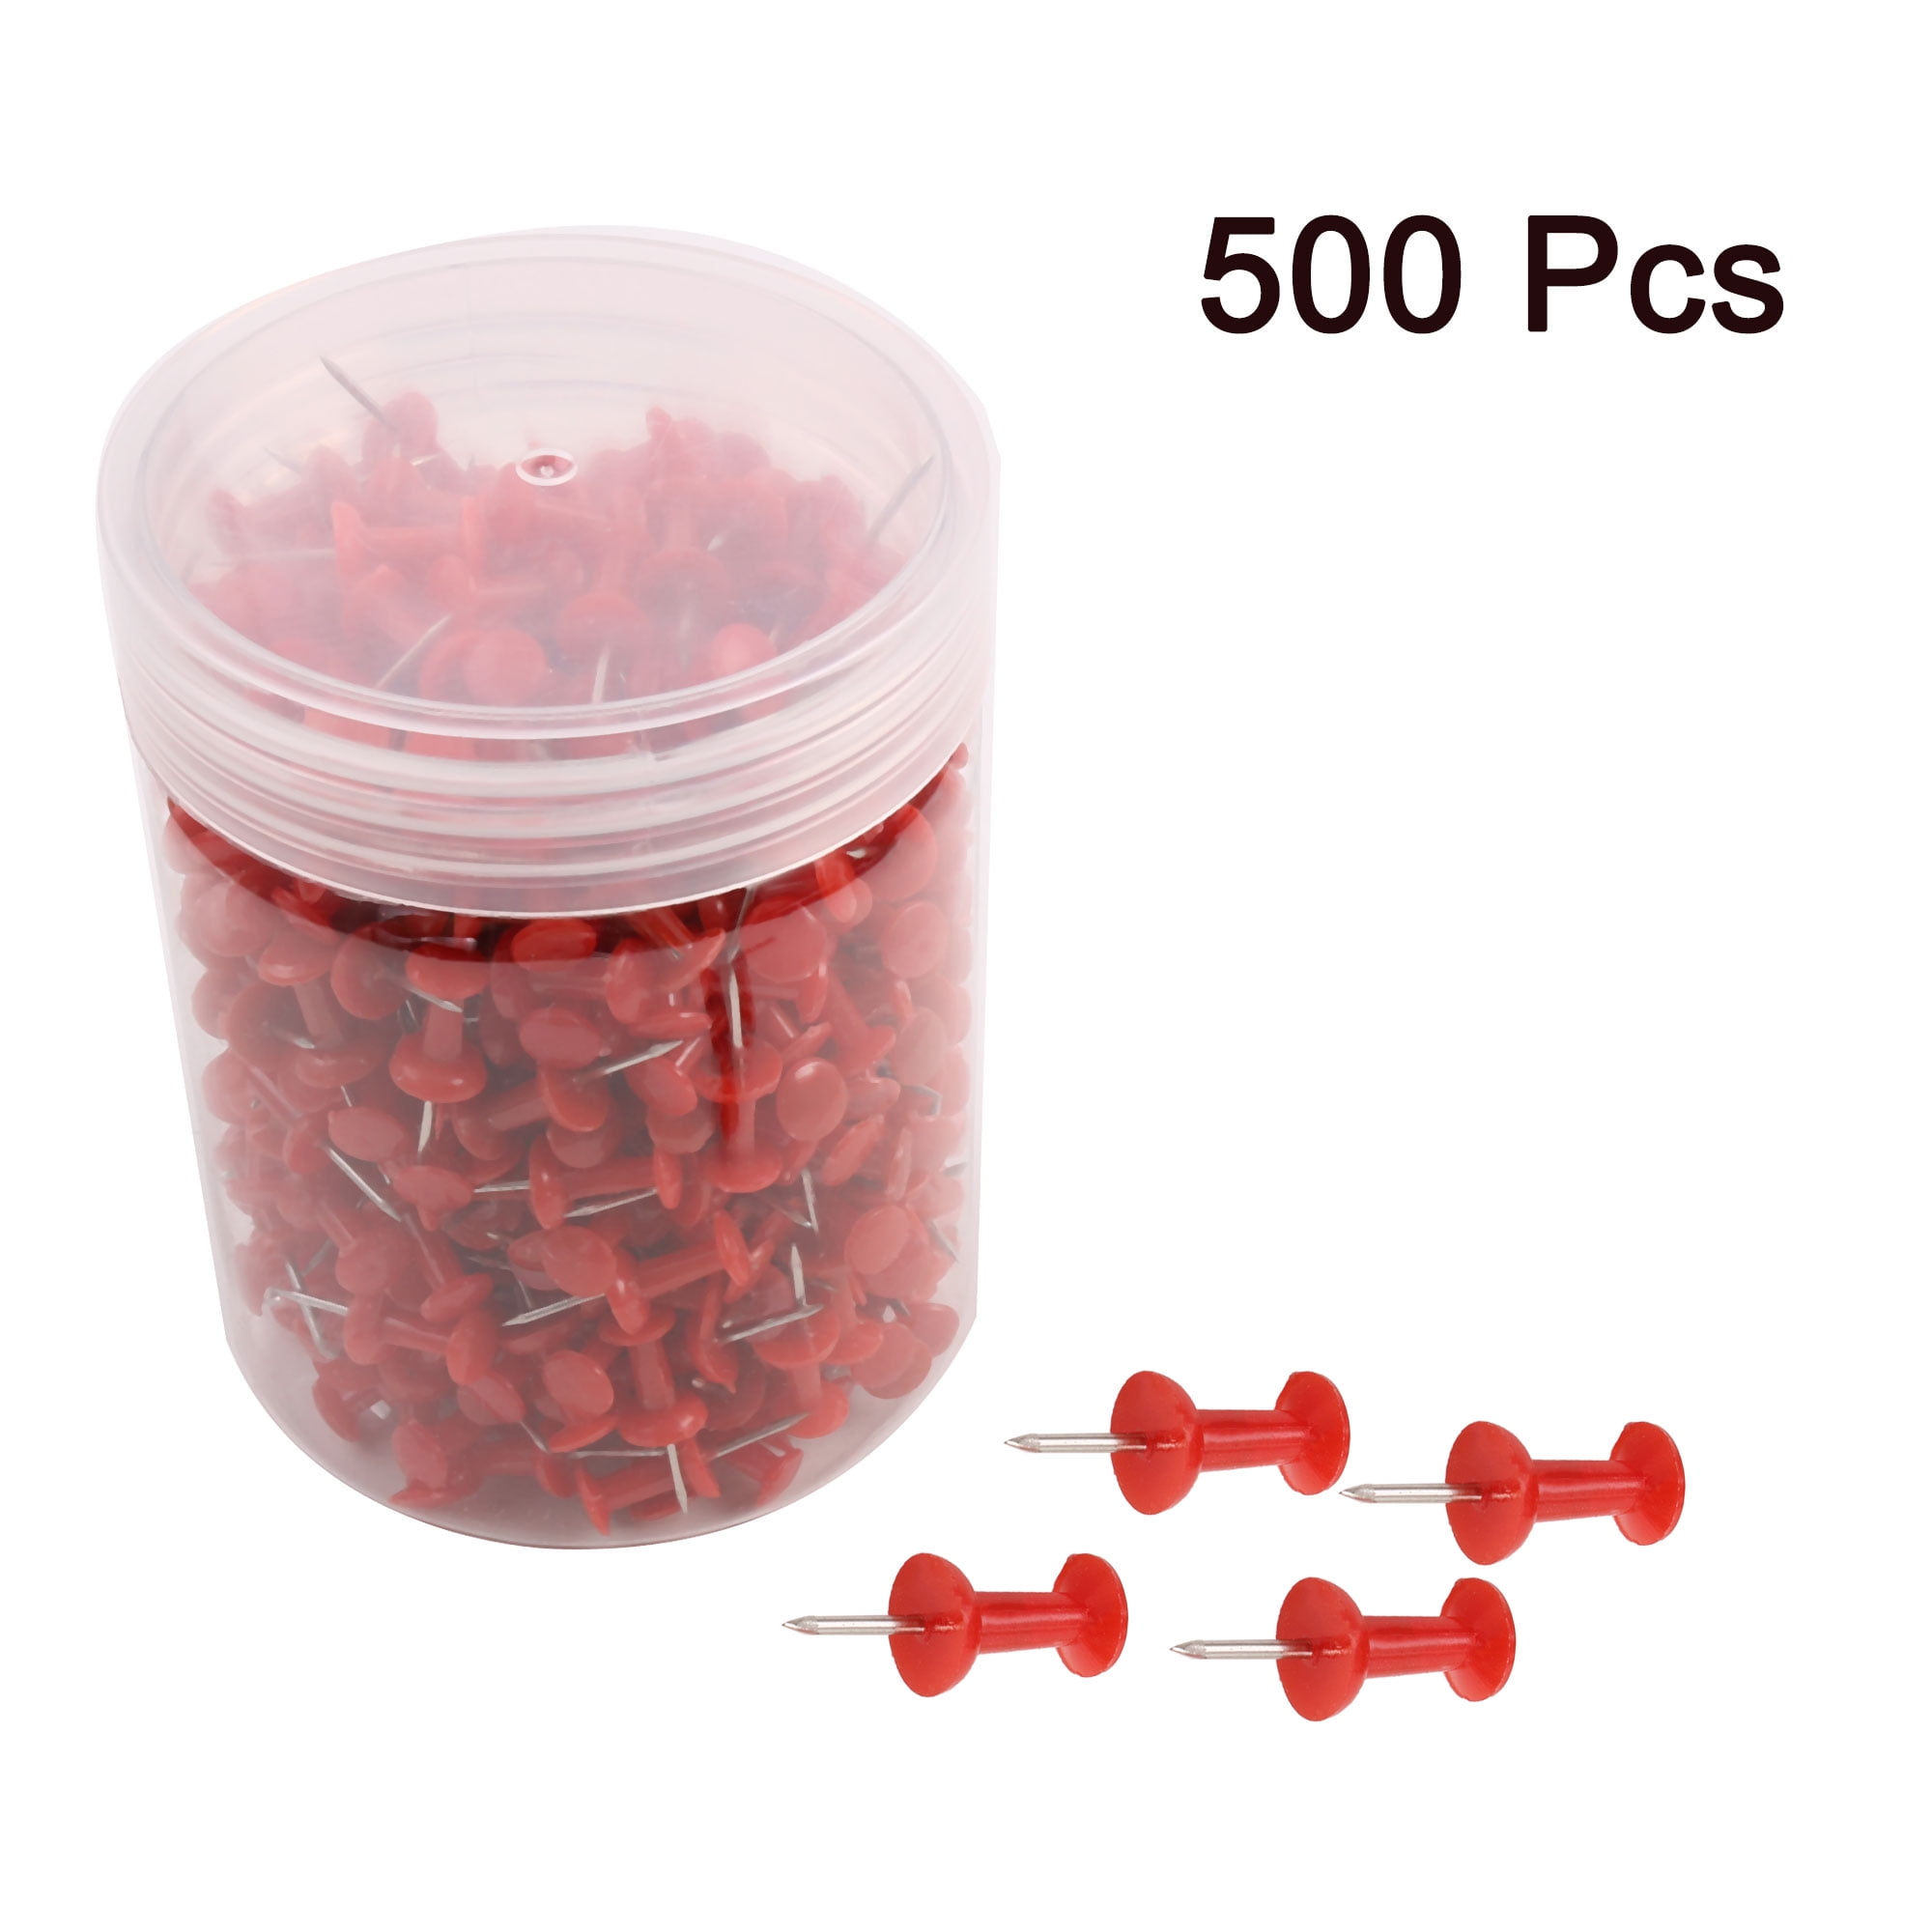 Uxcell 500 Pcs 3/8" Push Pins  Thumb Tacks Office Cork Boards Map Note Picture Hanging Red